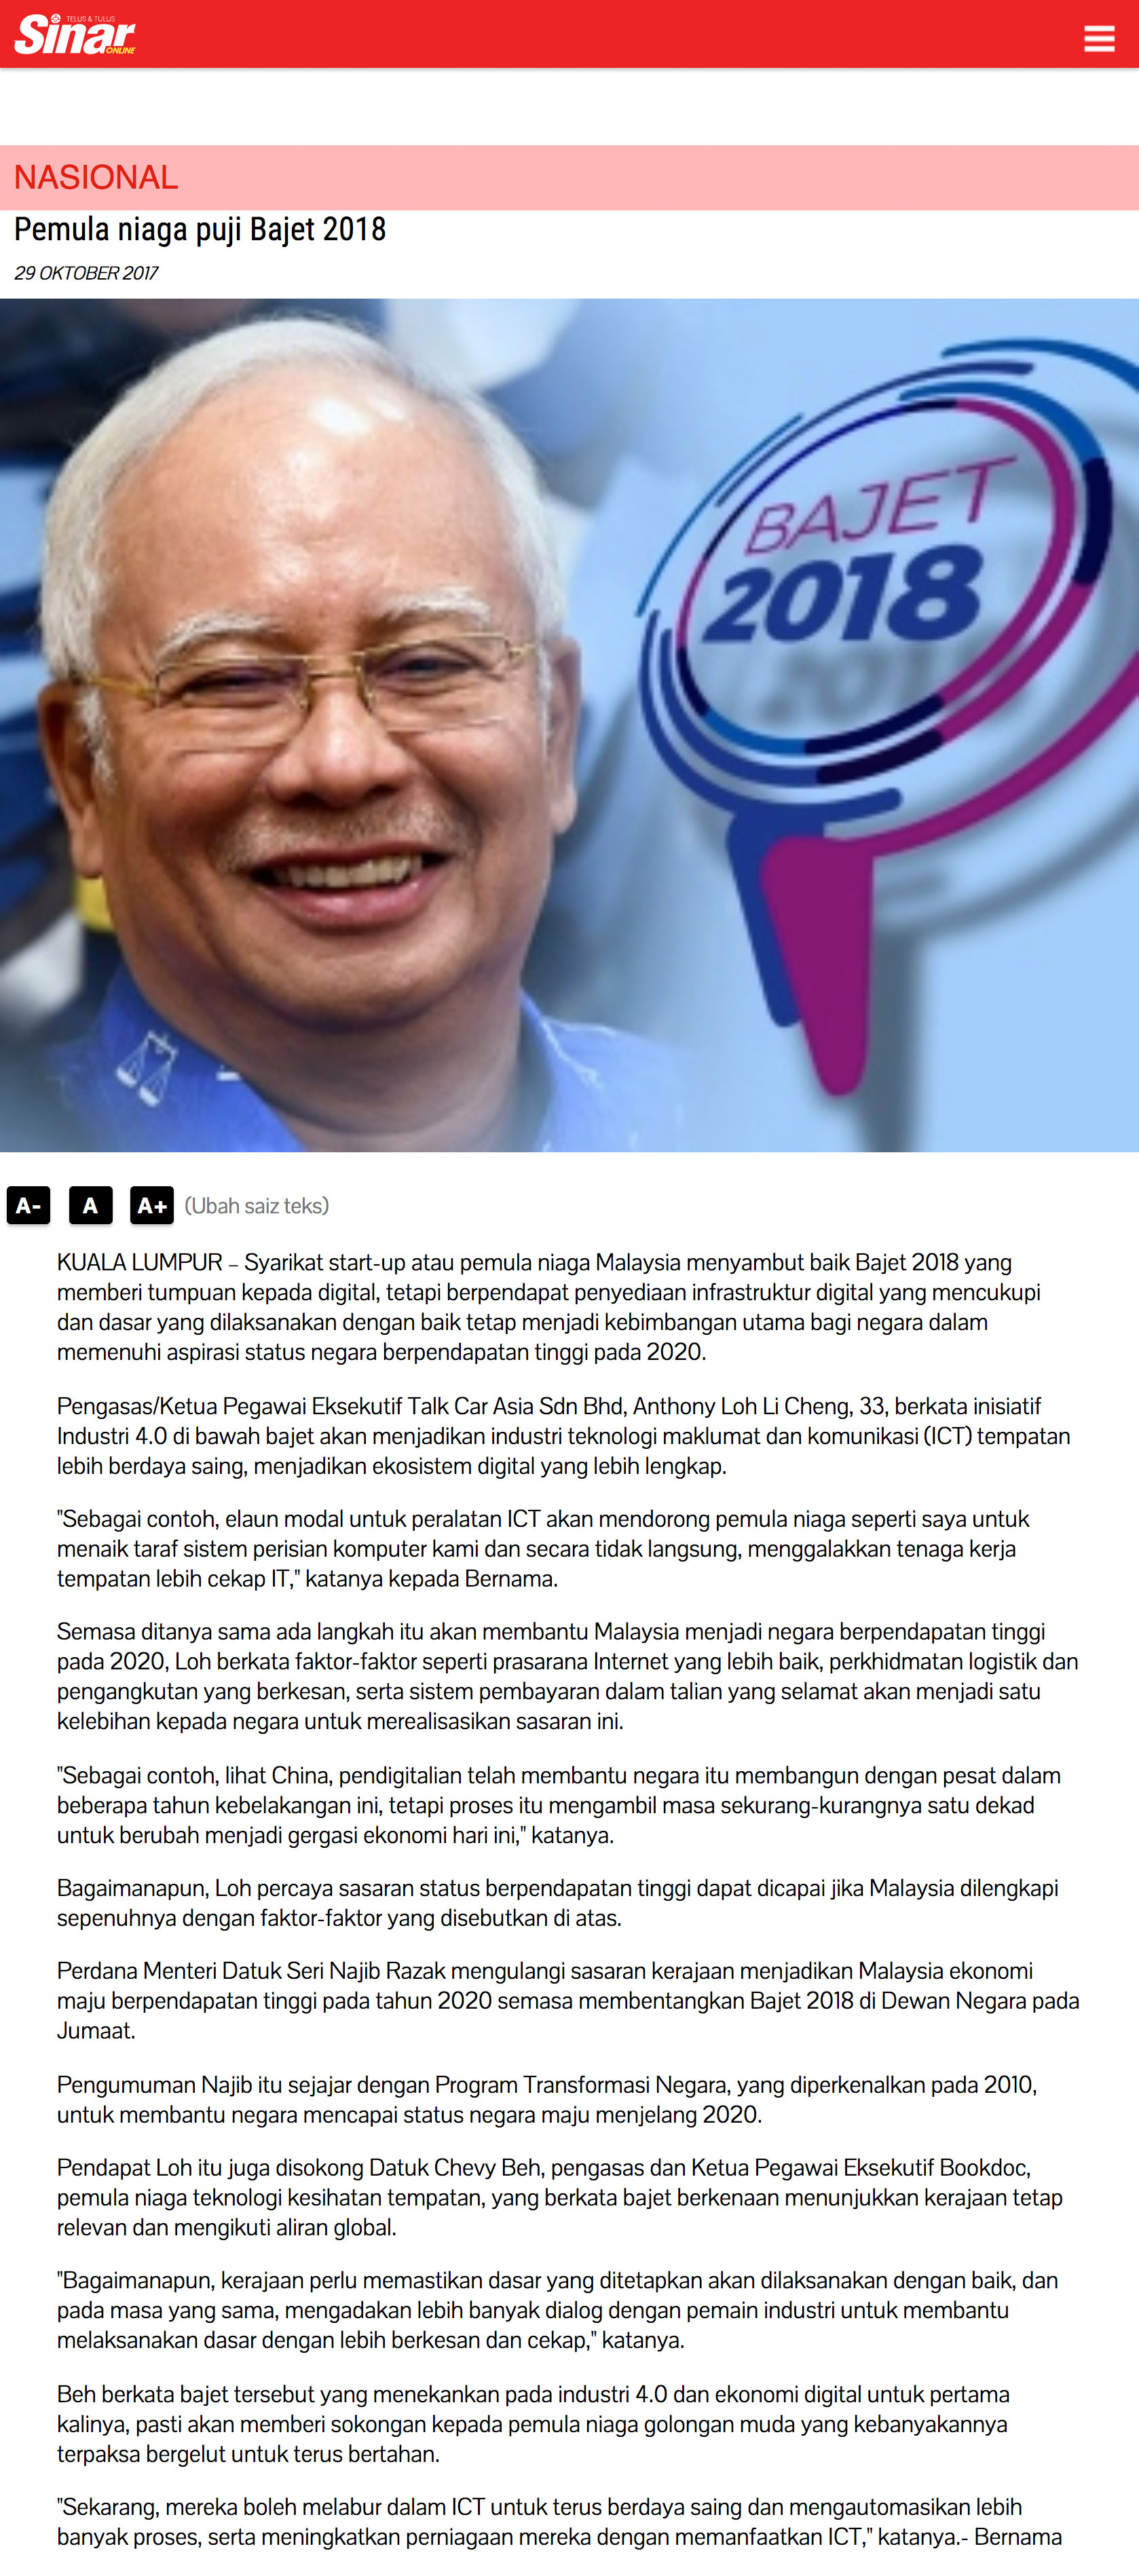 BookDoc Founder’s comments on Budget 2018 captured in Sinar Harian